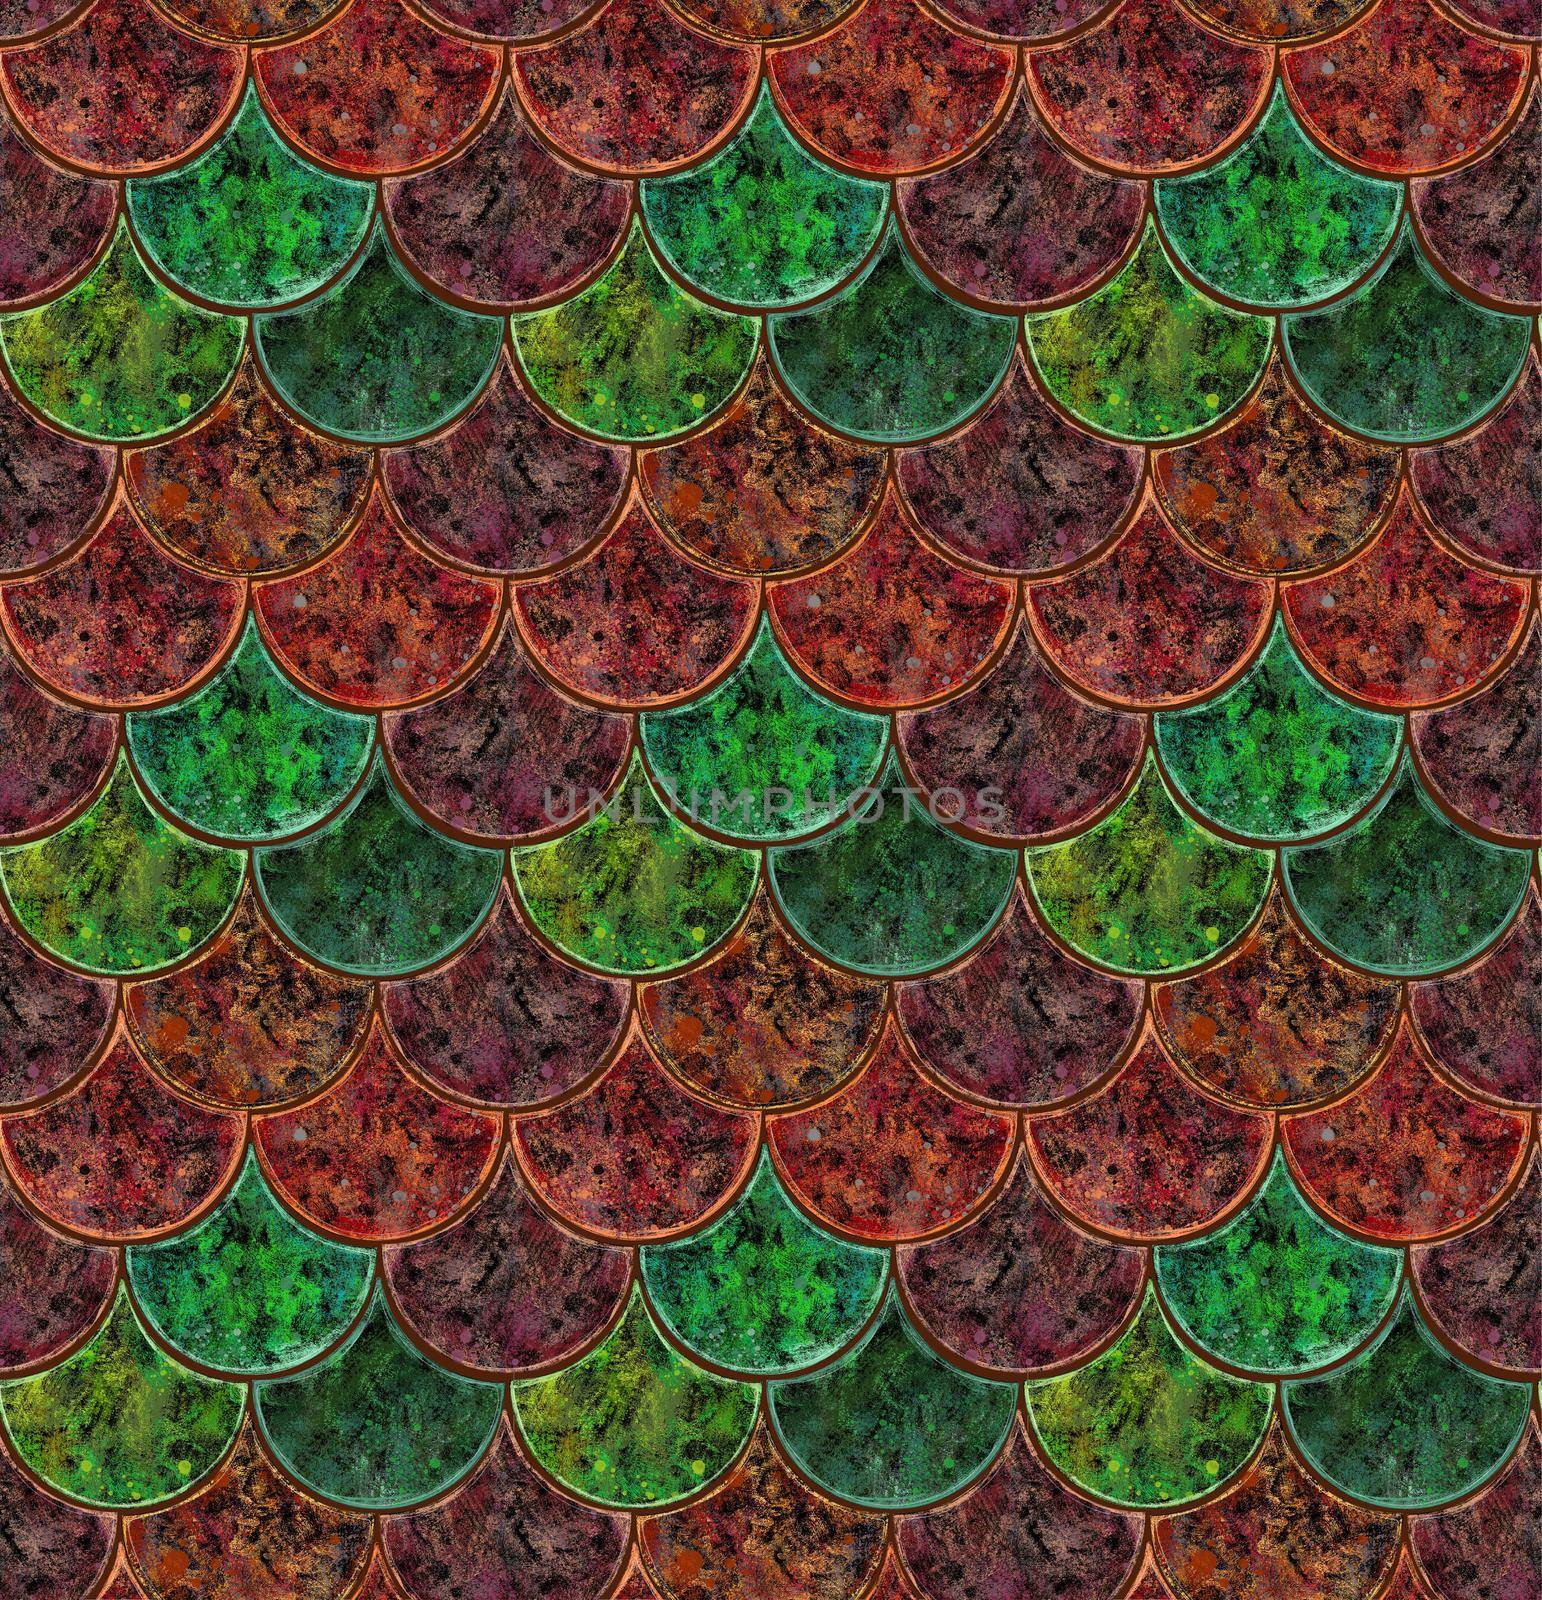 Seamless pattern. Red and green ceramic tiles. Picturesque texture. Fish scale pattern.